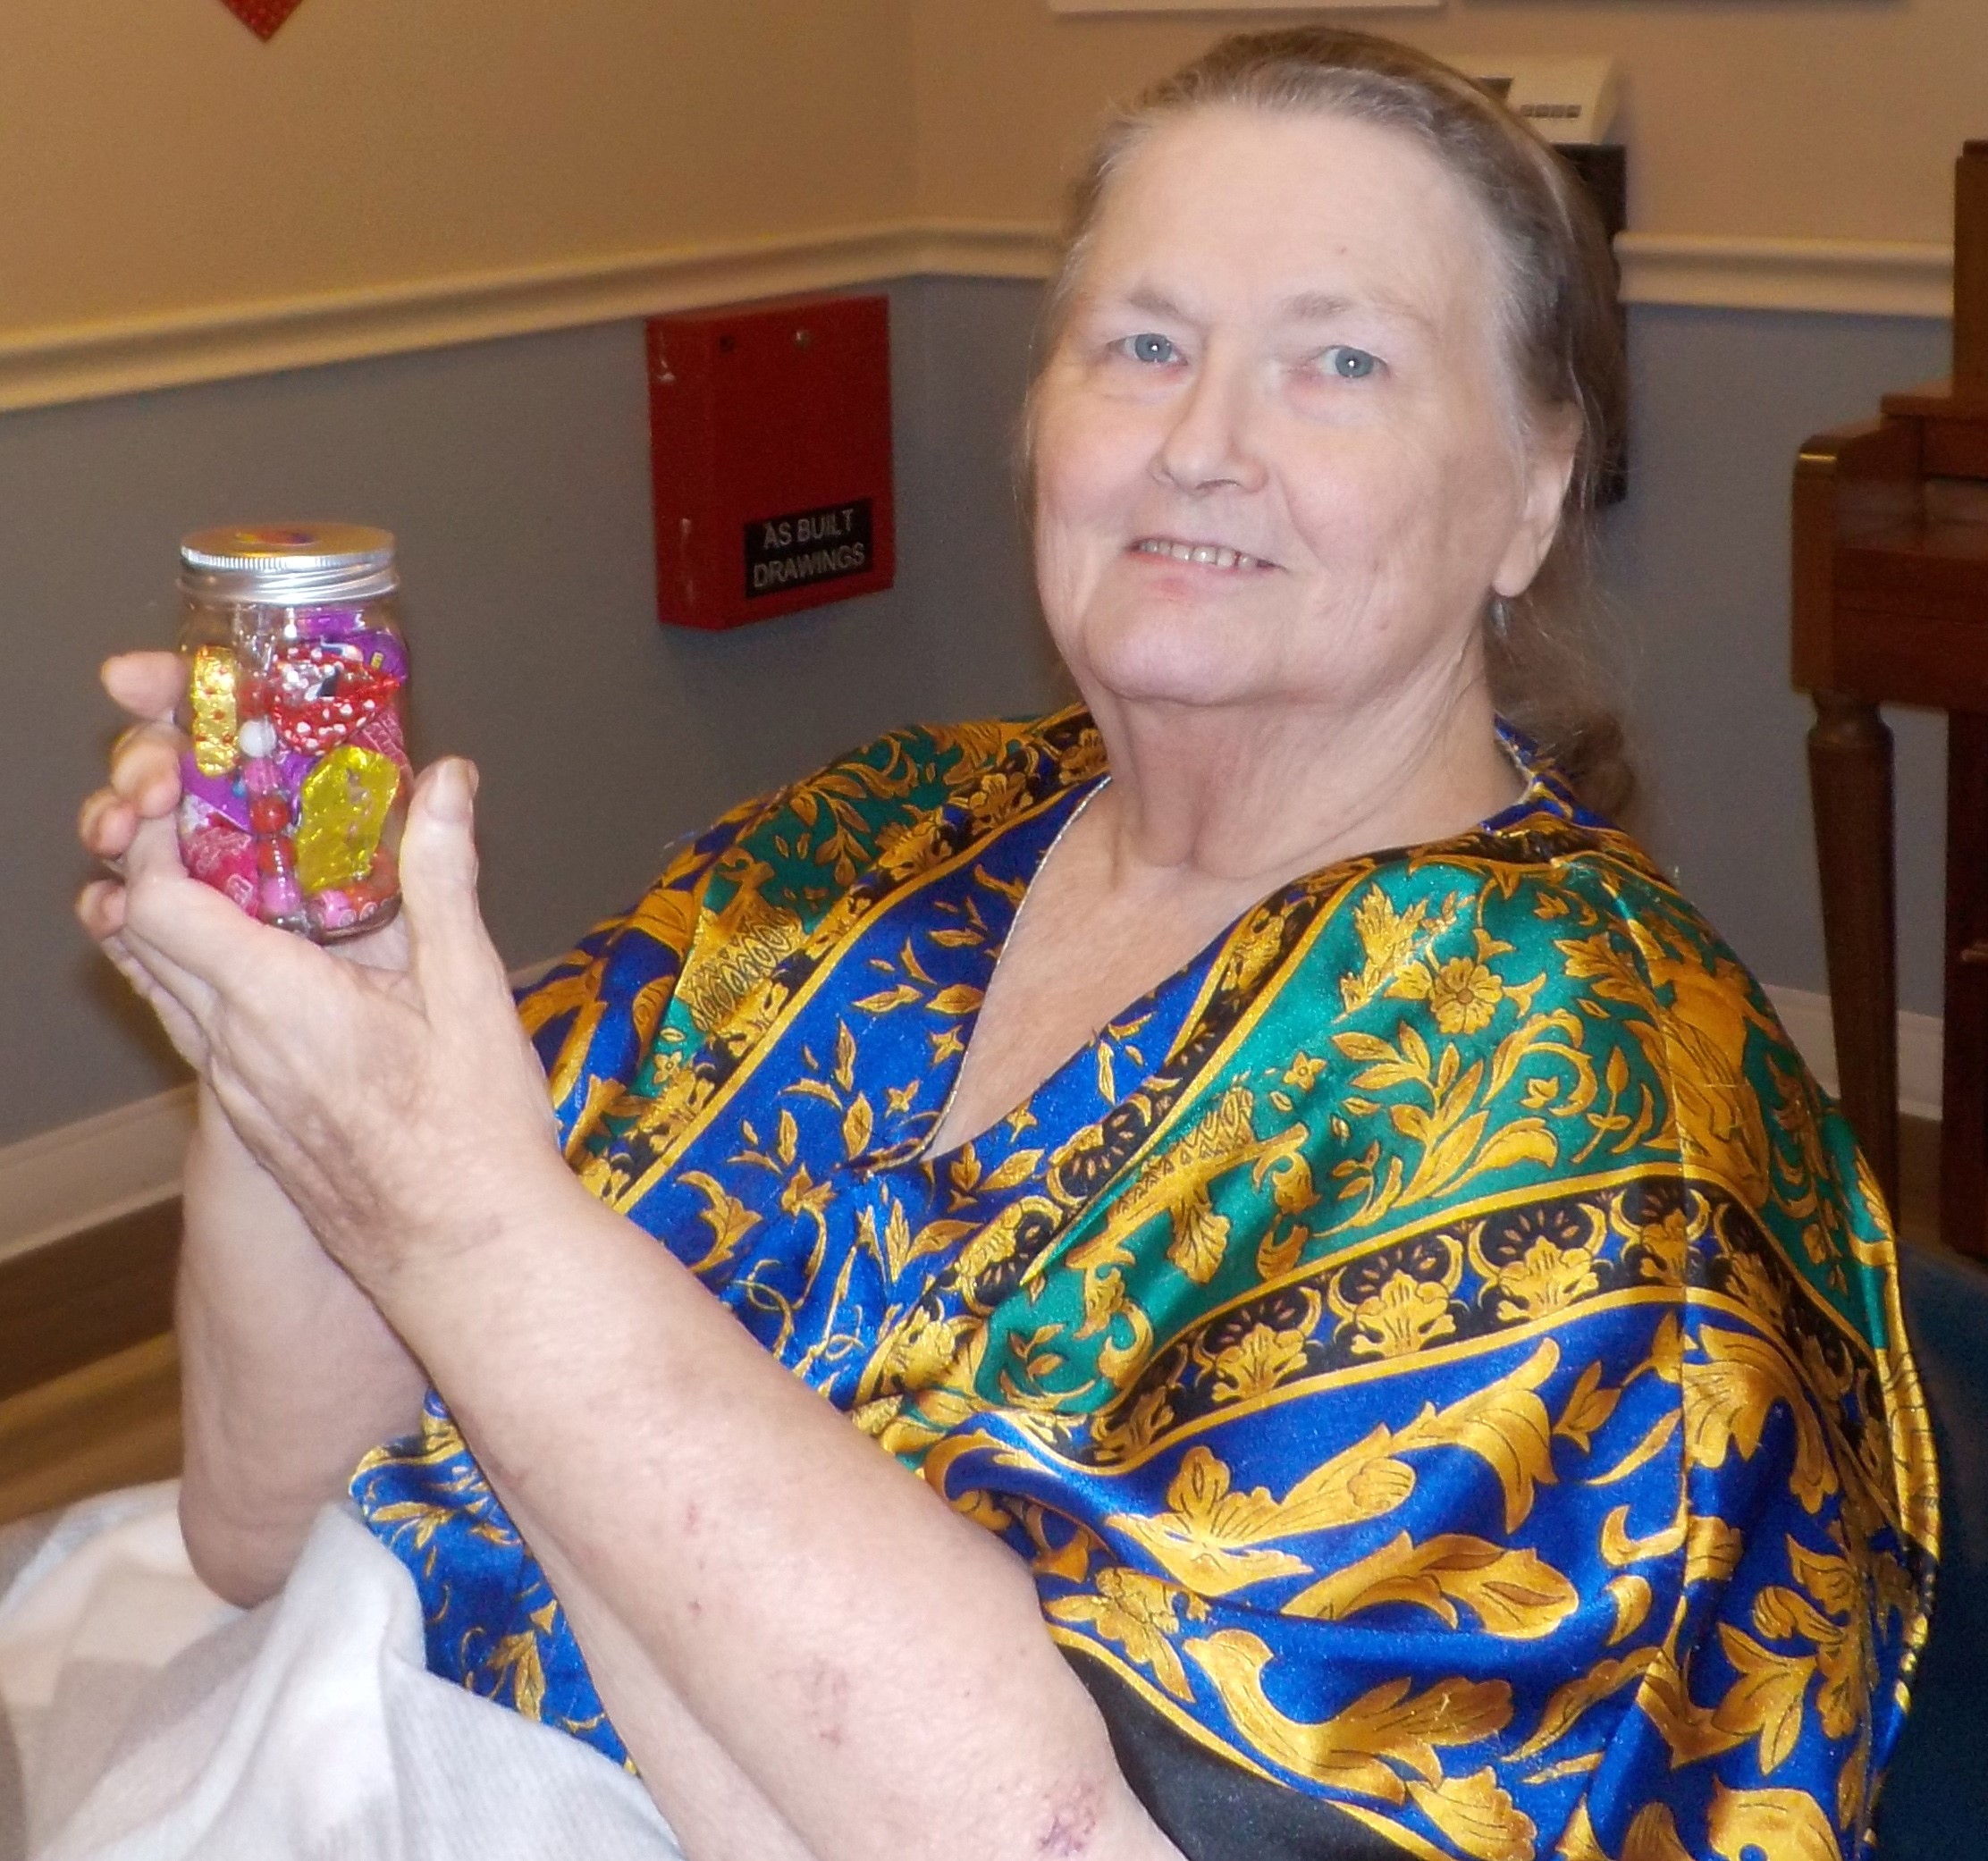 Norma Barton shows off a jar of candy she won in a raffle.